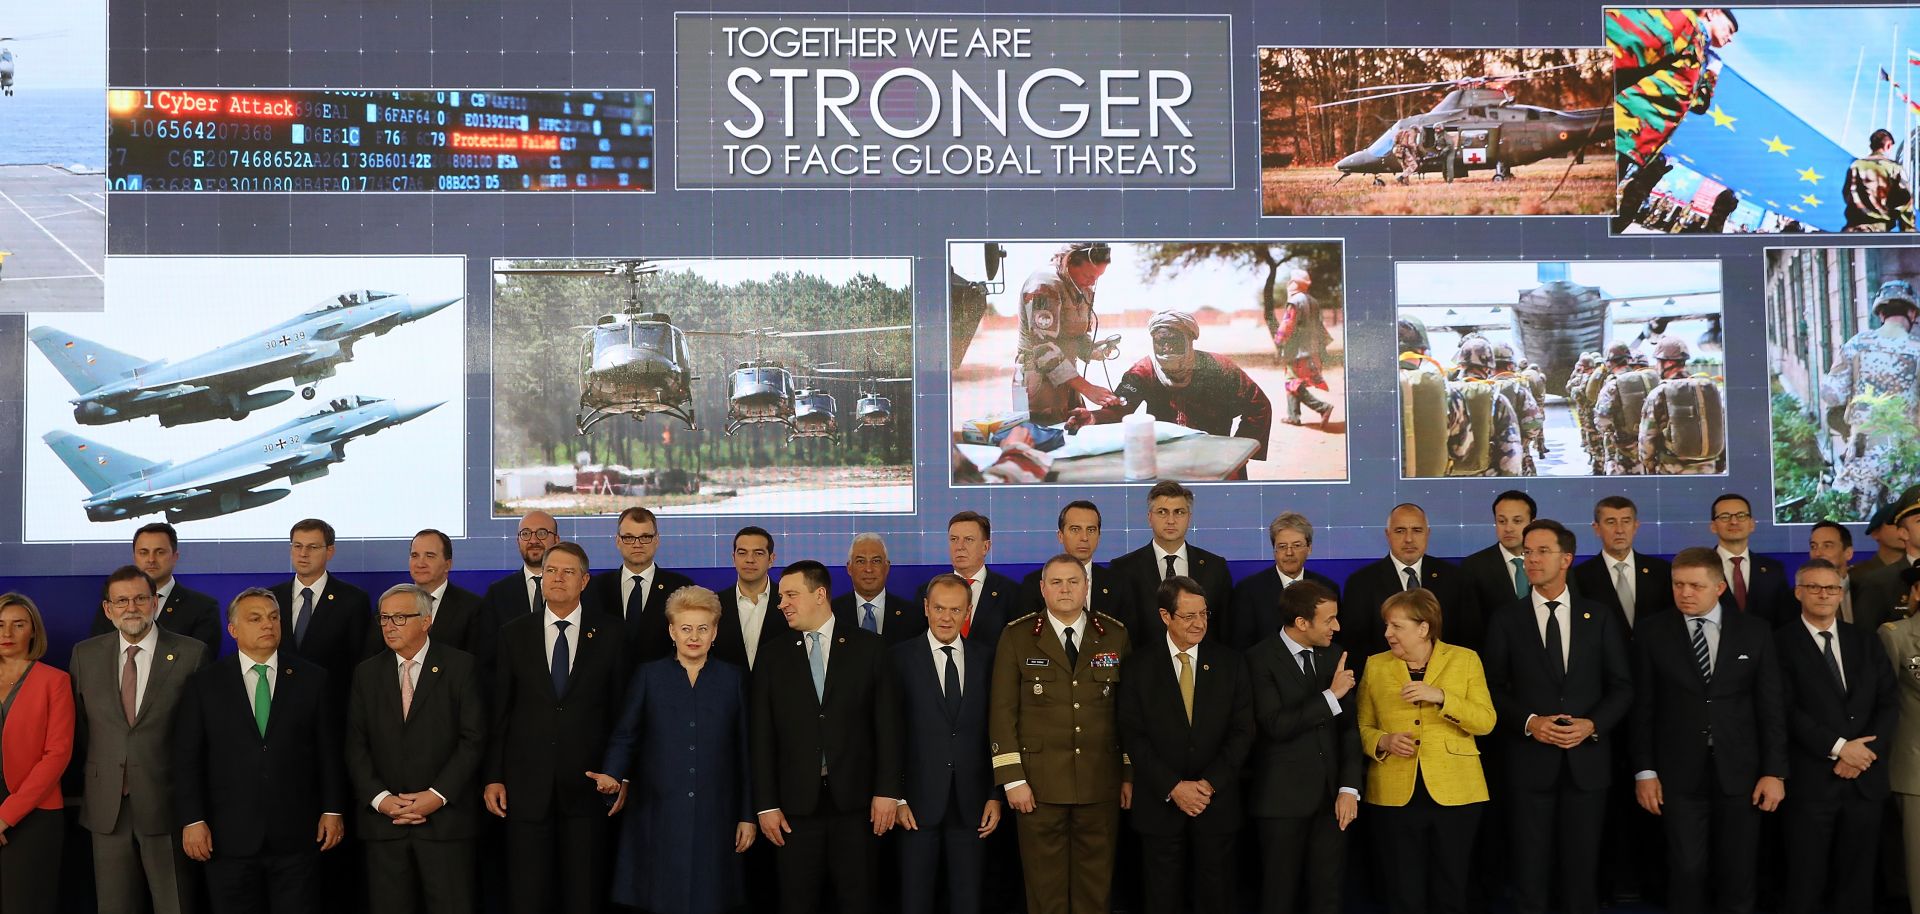 European leaders pose during the launch of the Permanent Structured Cooperation (PESCO), a pact bringing together 25 EU governments to jointly fund, develop and deploy armed forces.